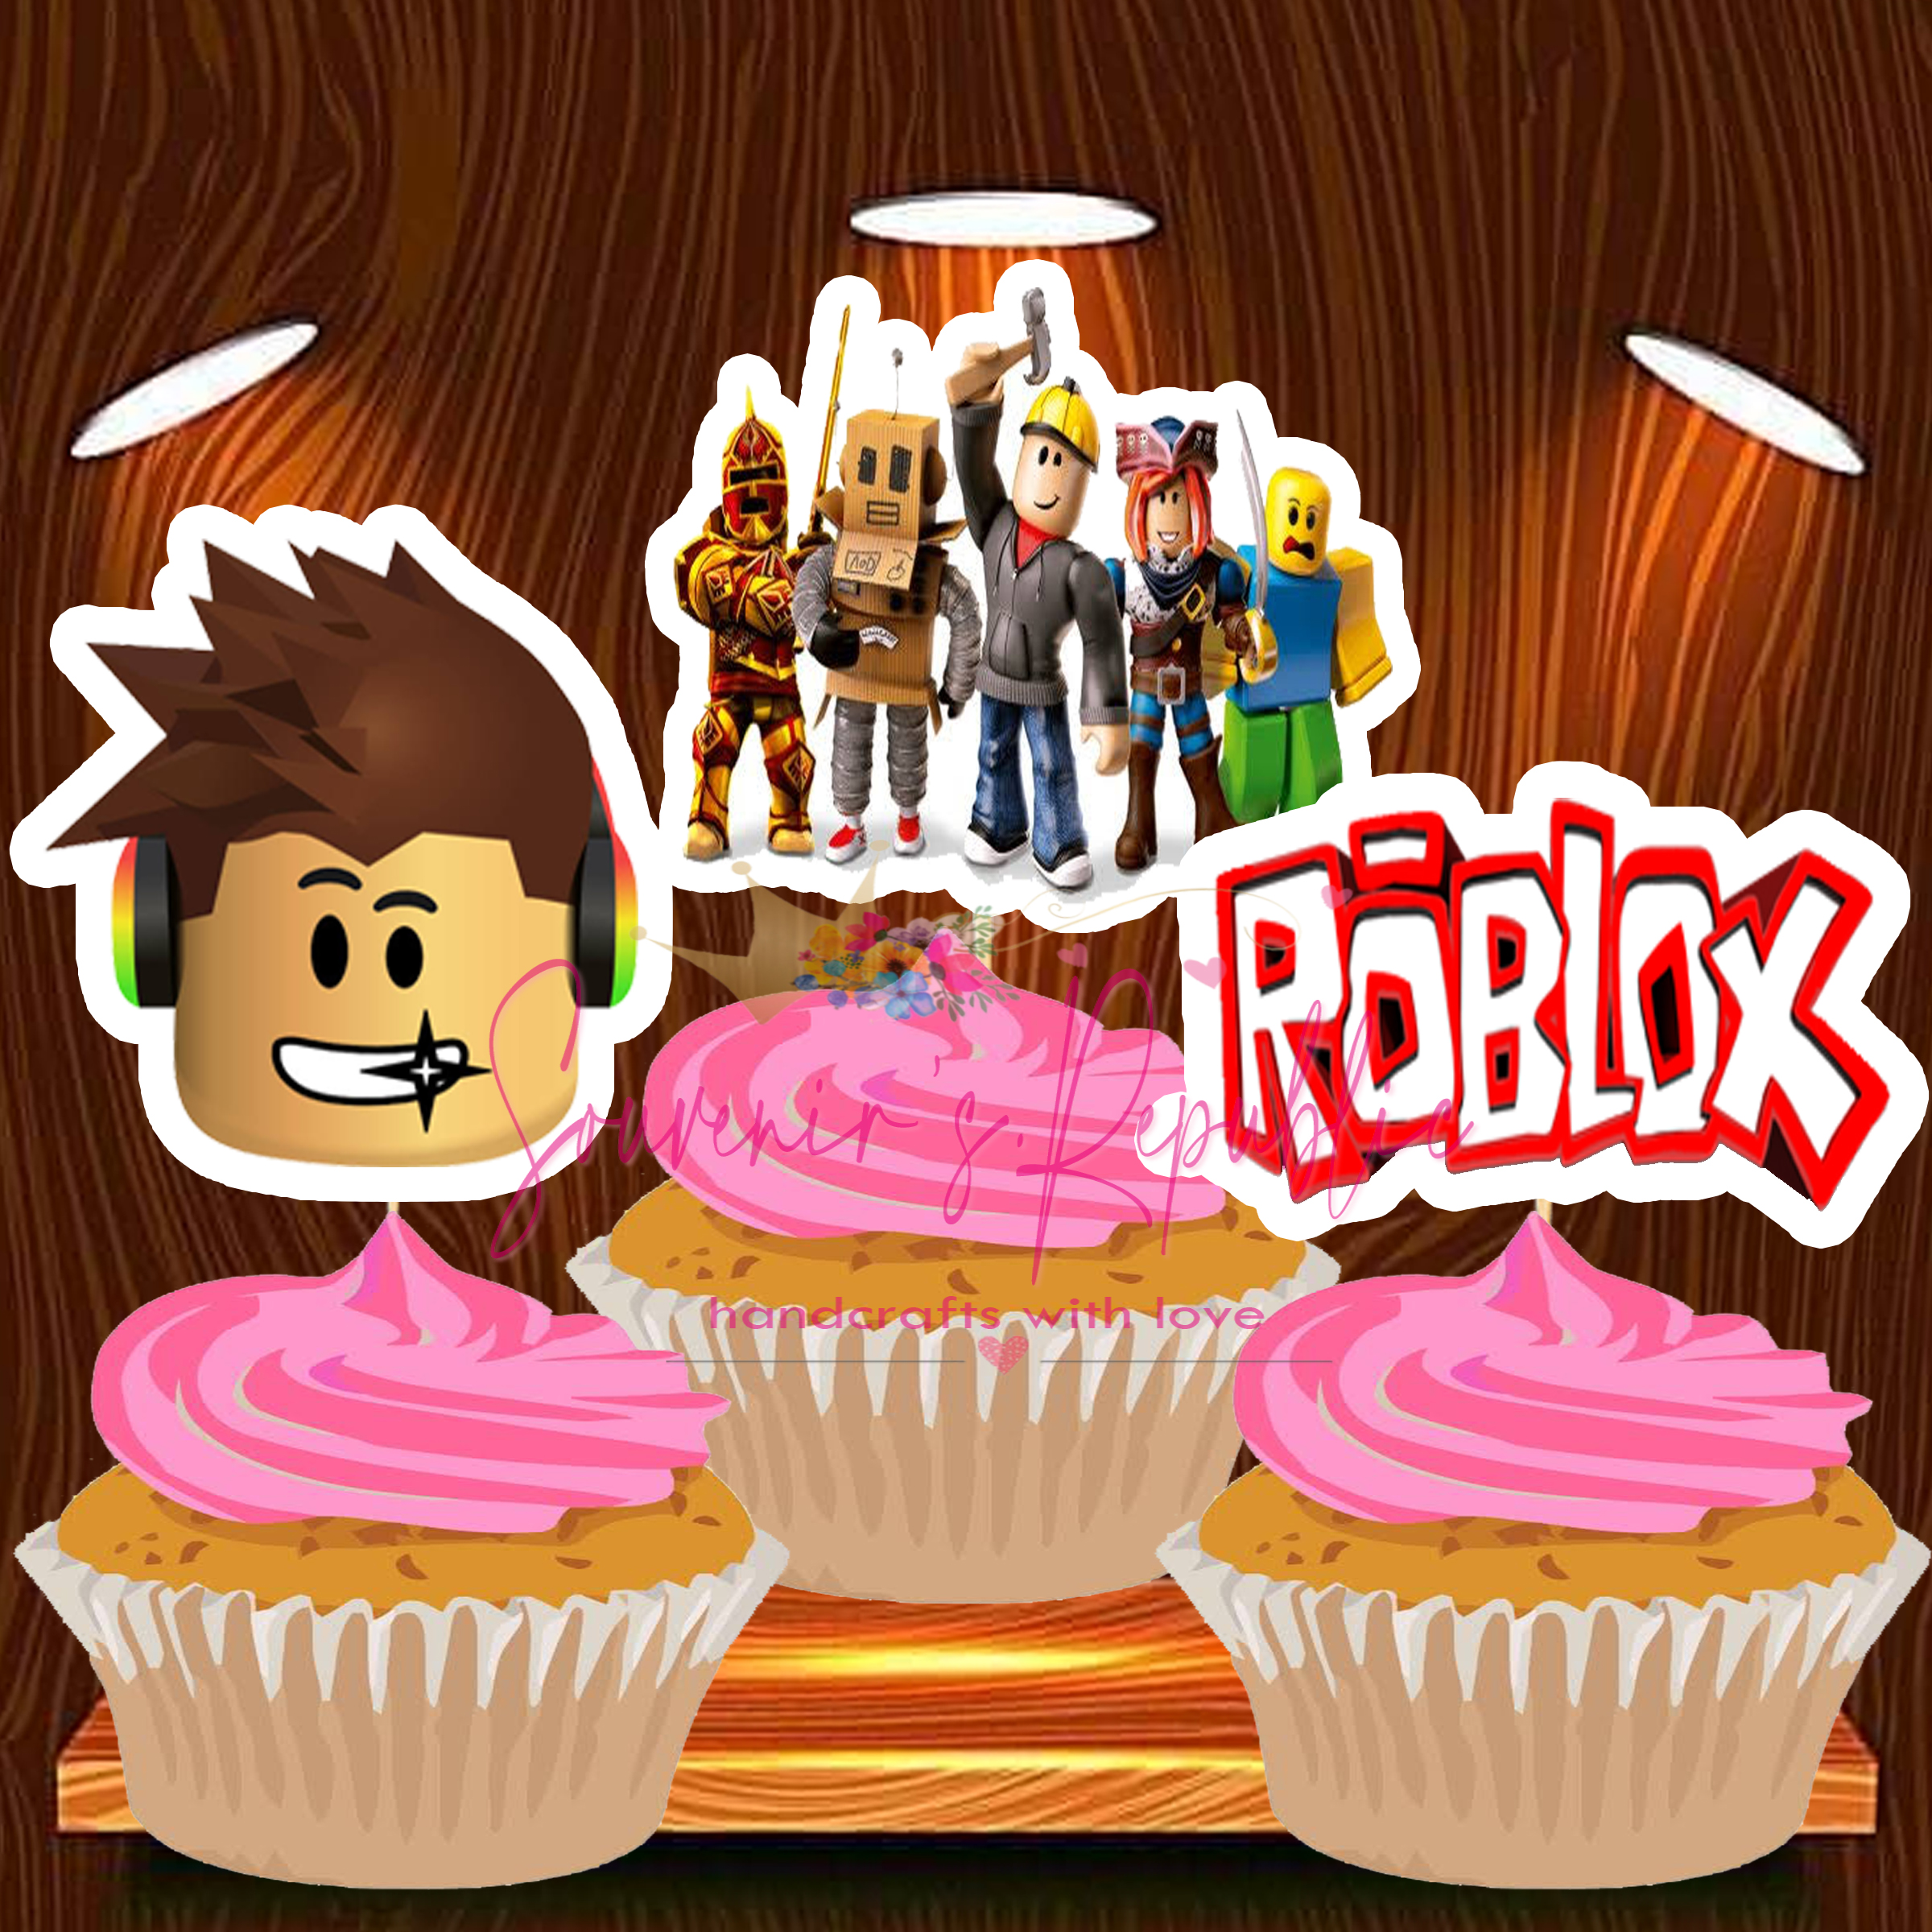 Roblox Cupcake Topper 24 Pcs Buy Sell Online Cake Tiered Stands With Cheap Price Lazada Ph - roblox cake topper printable